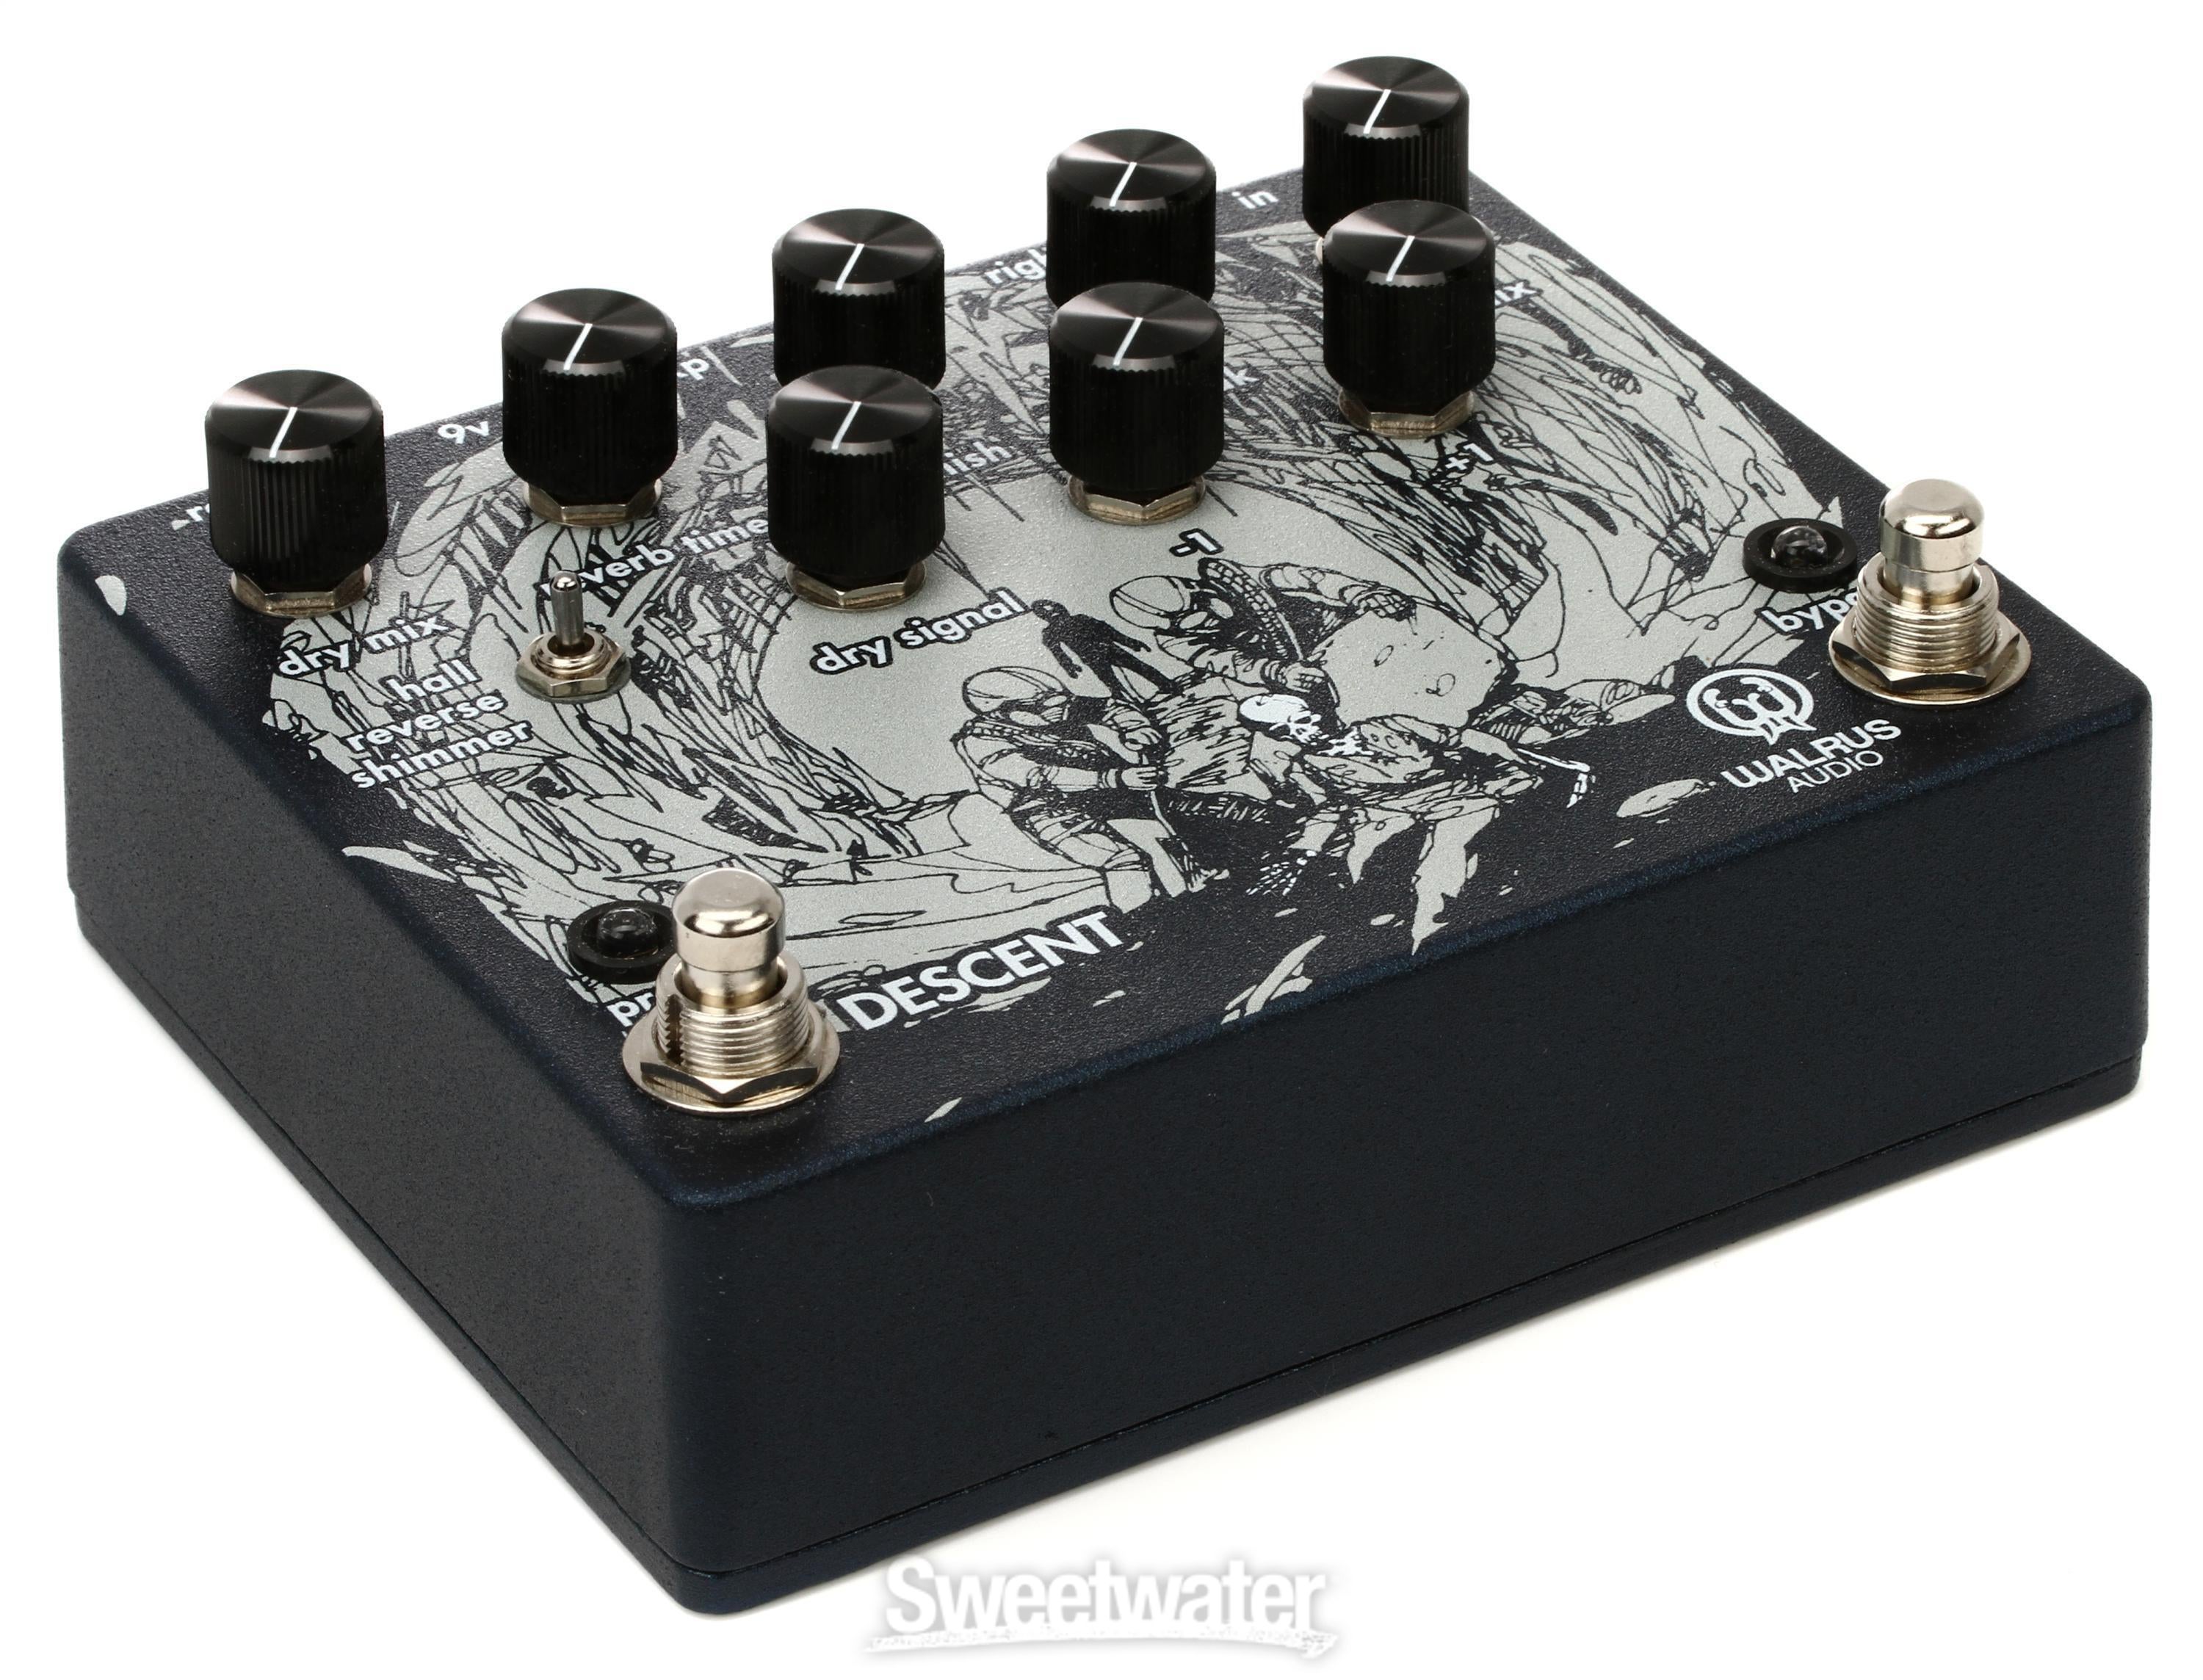 Walrus Audio Descent Reverb/Octave Machine Pedal | Sweetwater